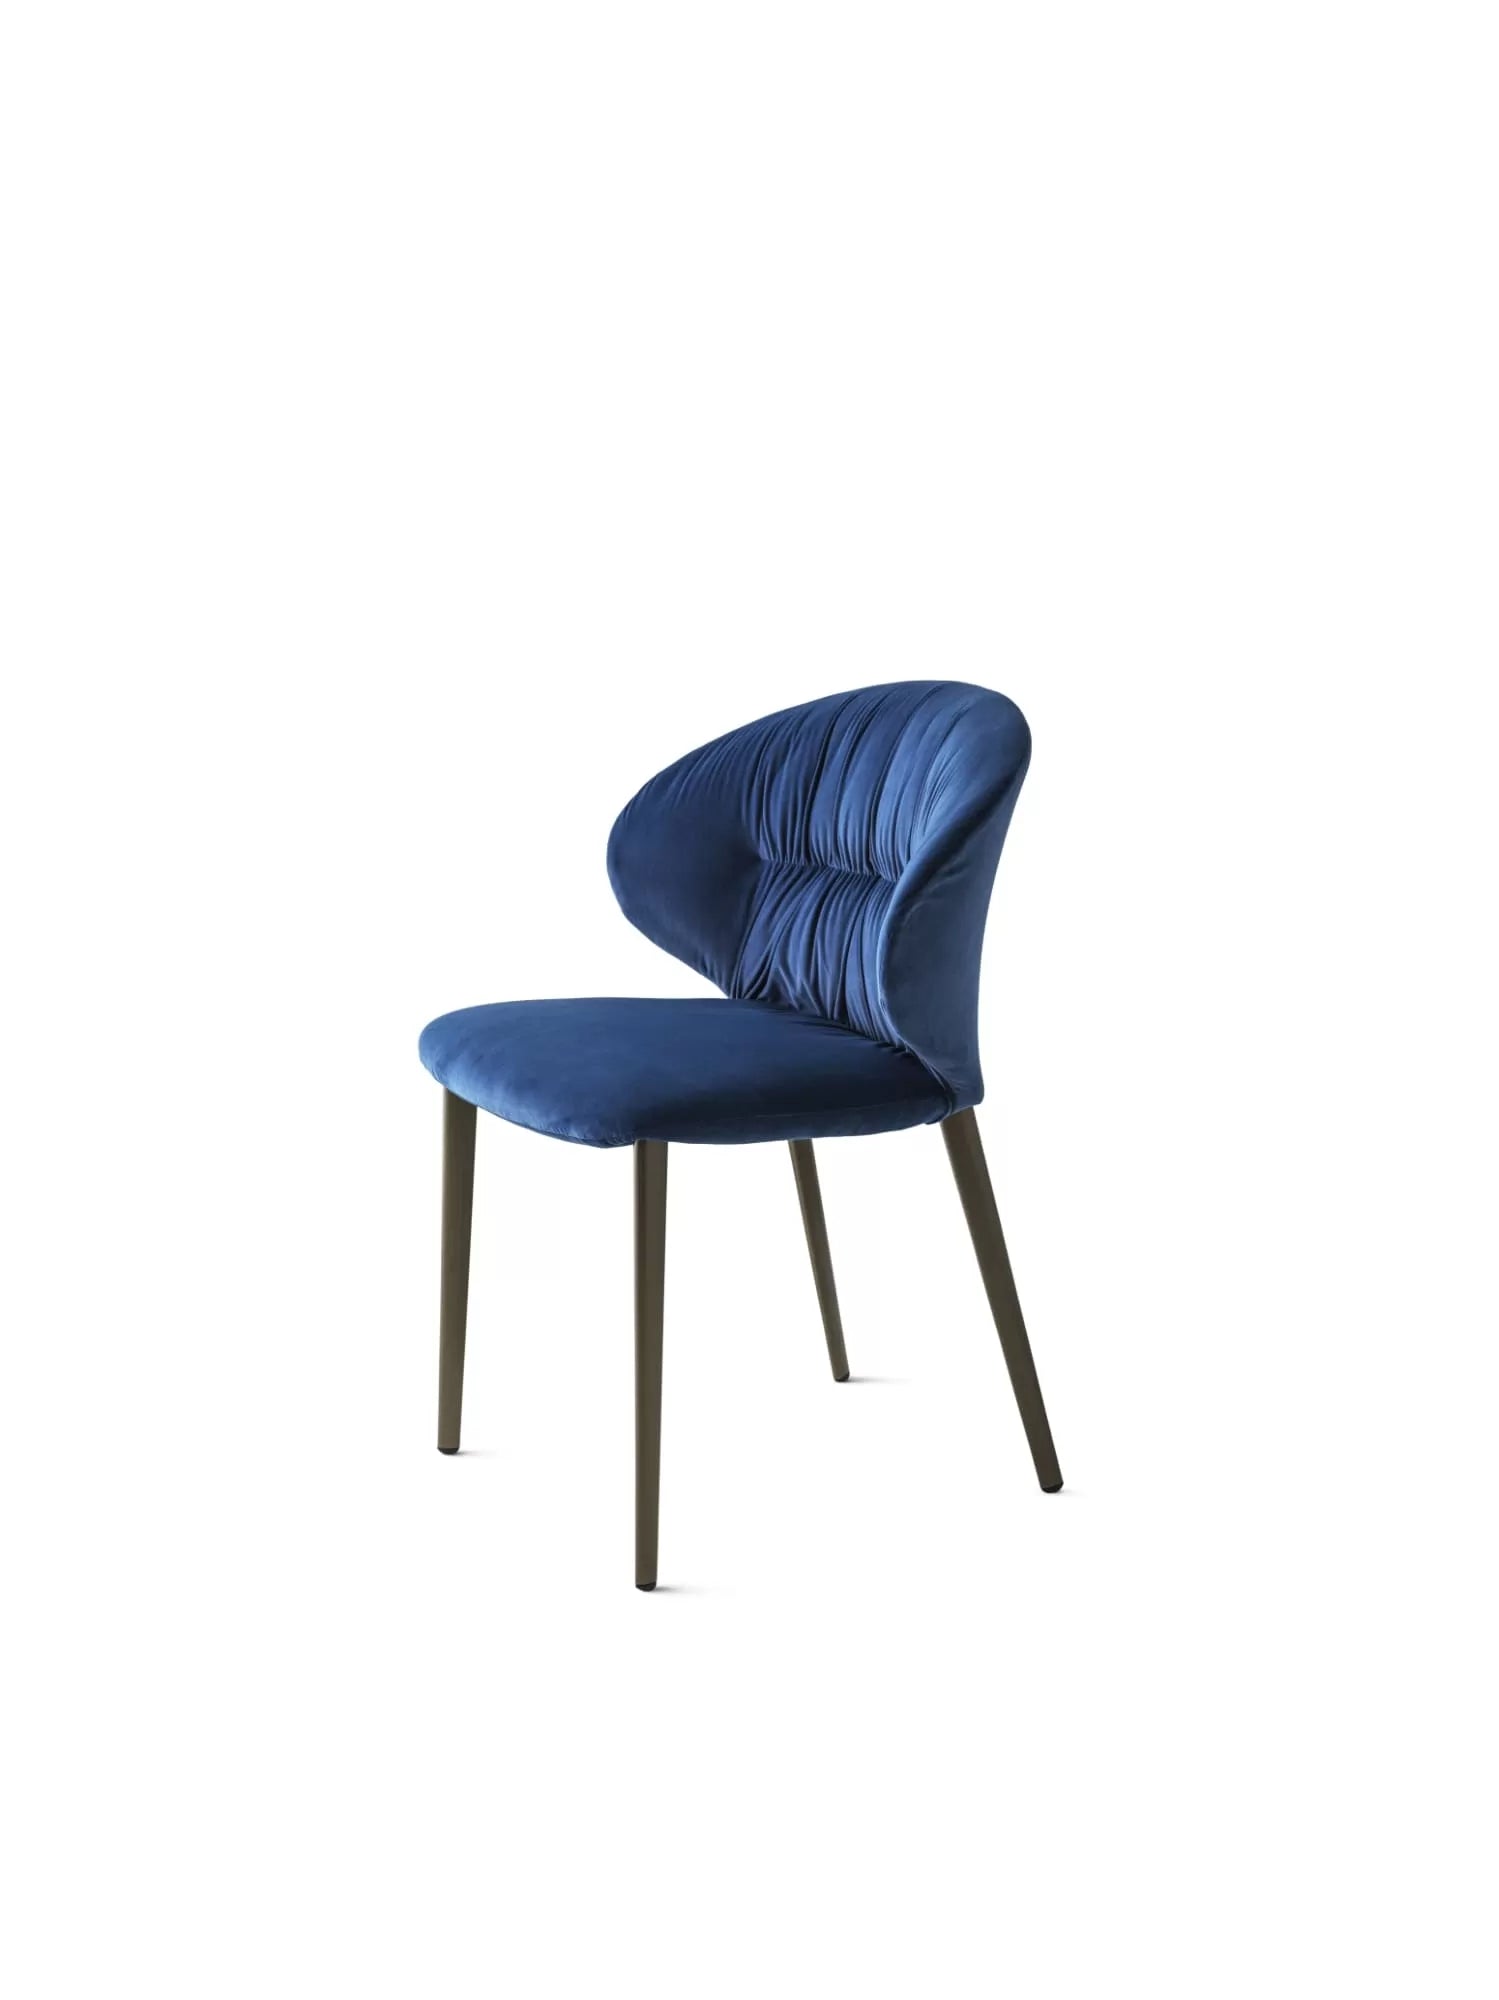 Drop Chair With Conical Section Metal Frame